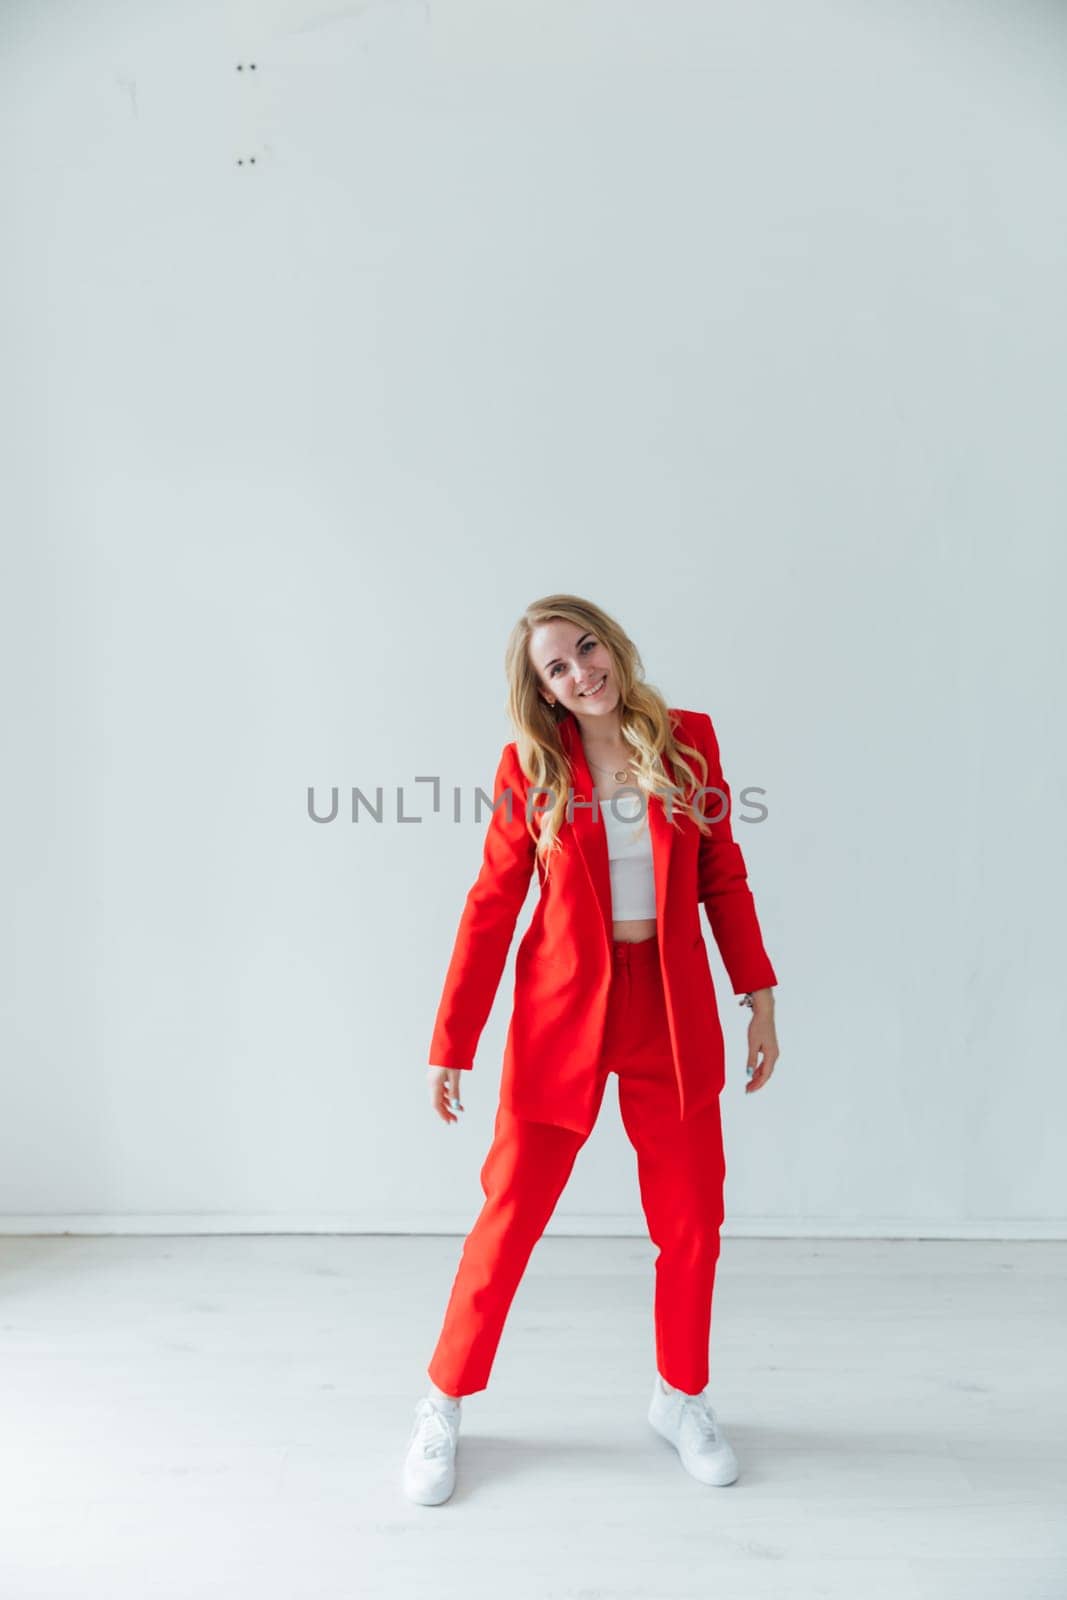 Beautiful blonde woman in red business suit by Simakov